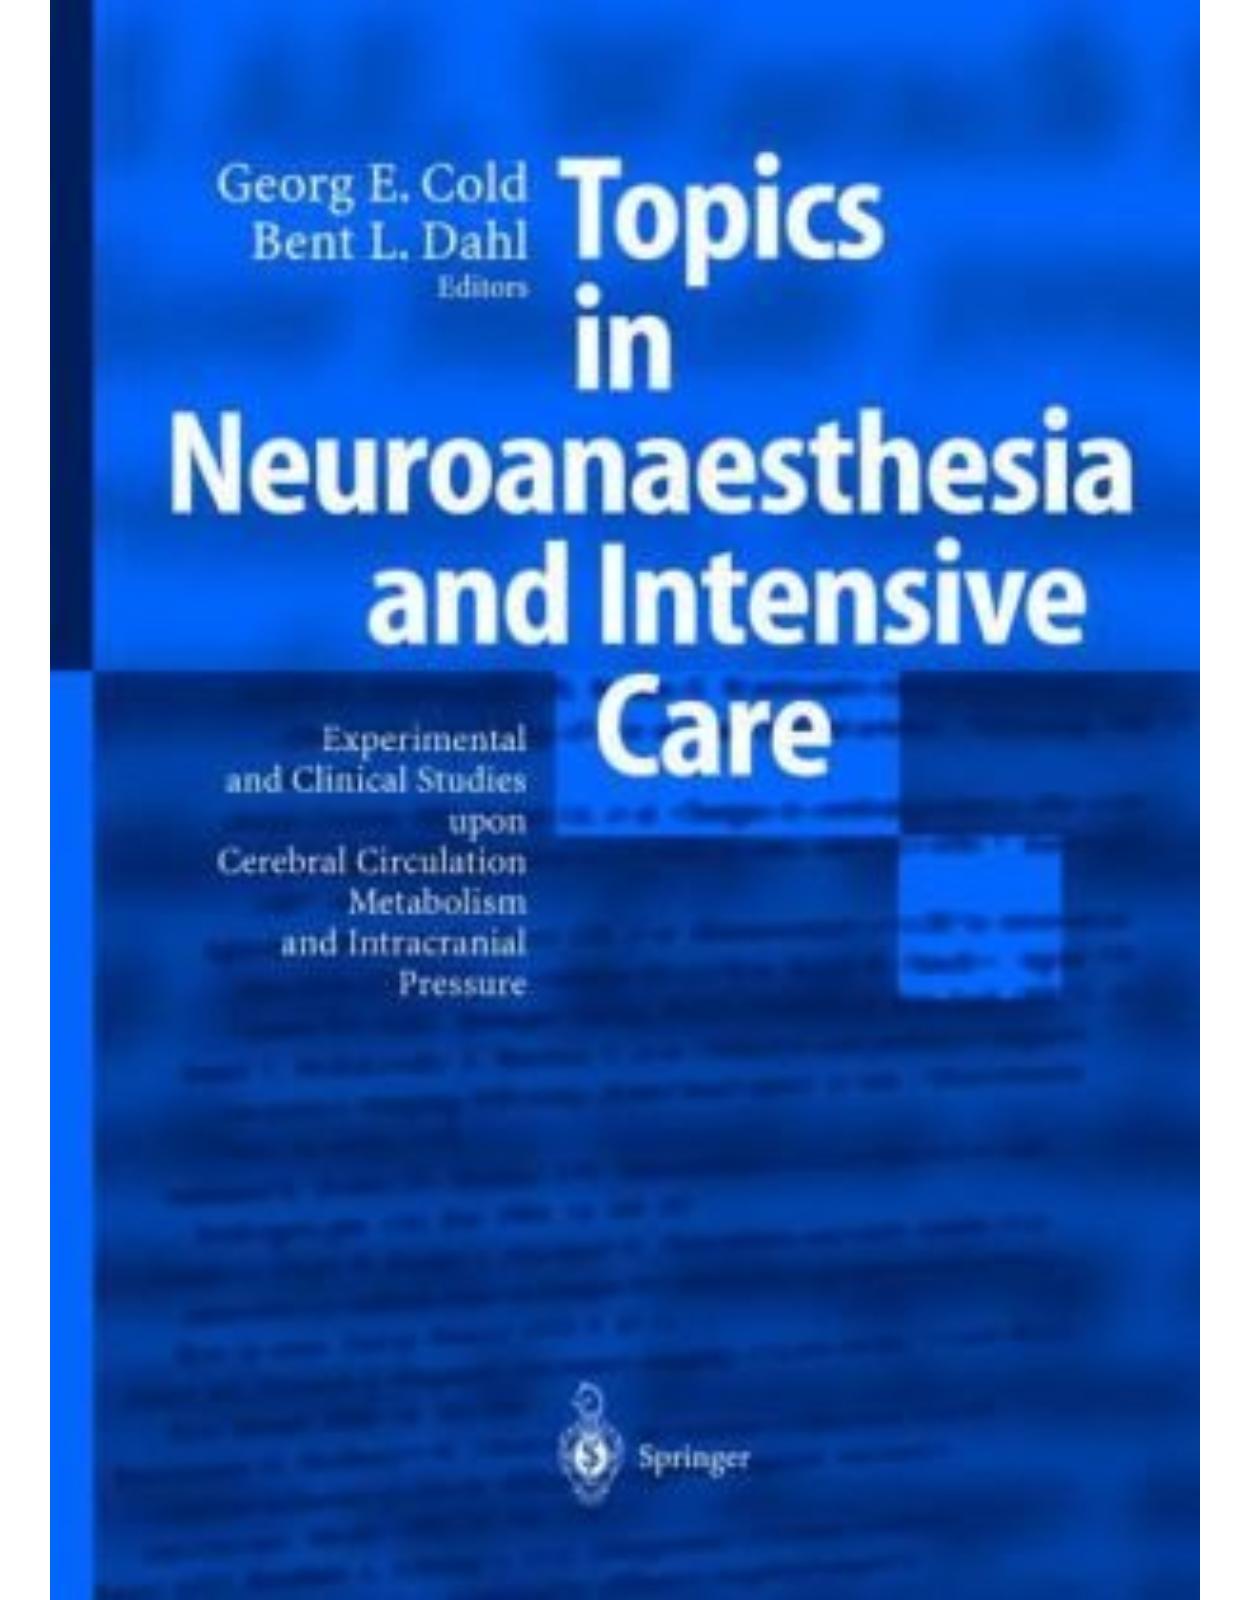 Topics in Neuroanaesthesia and Intensive Care